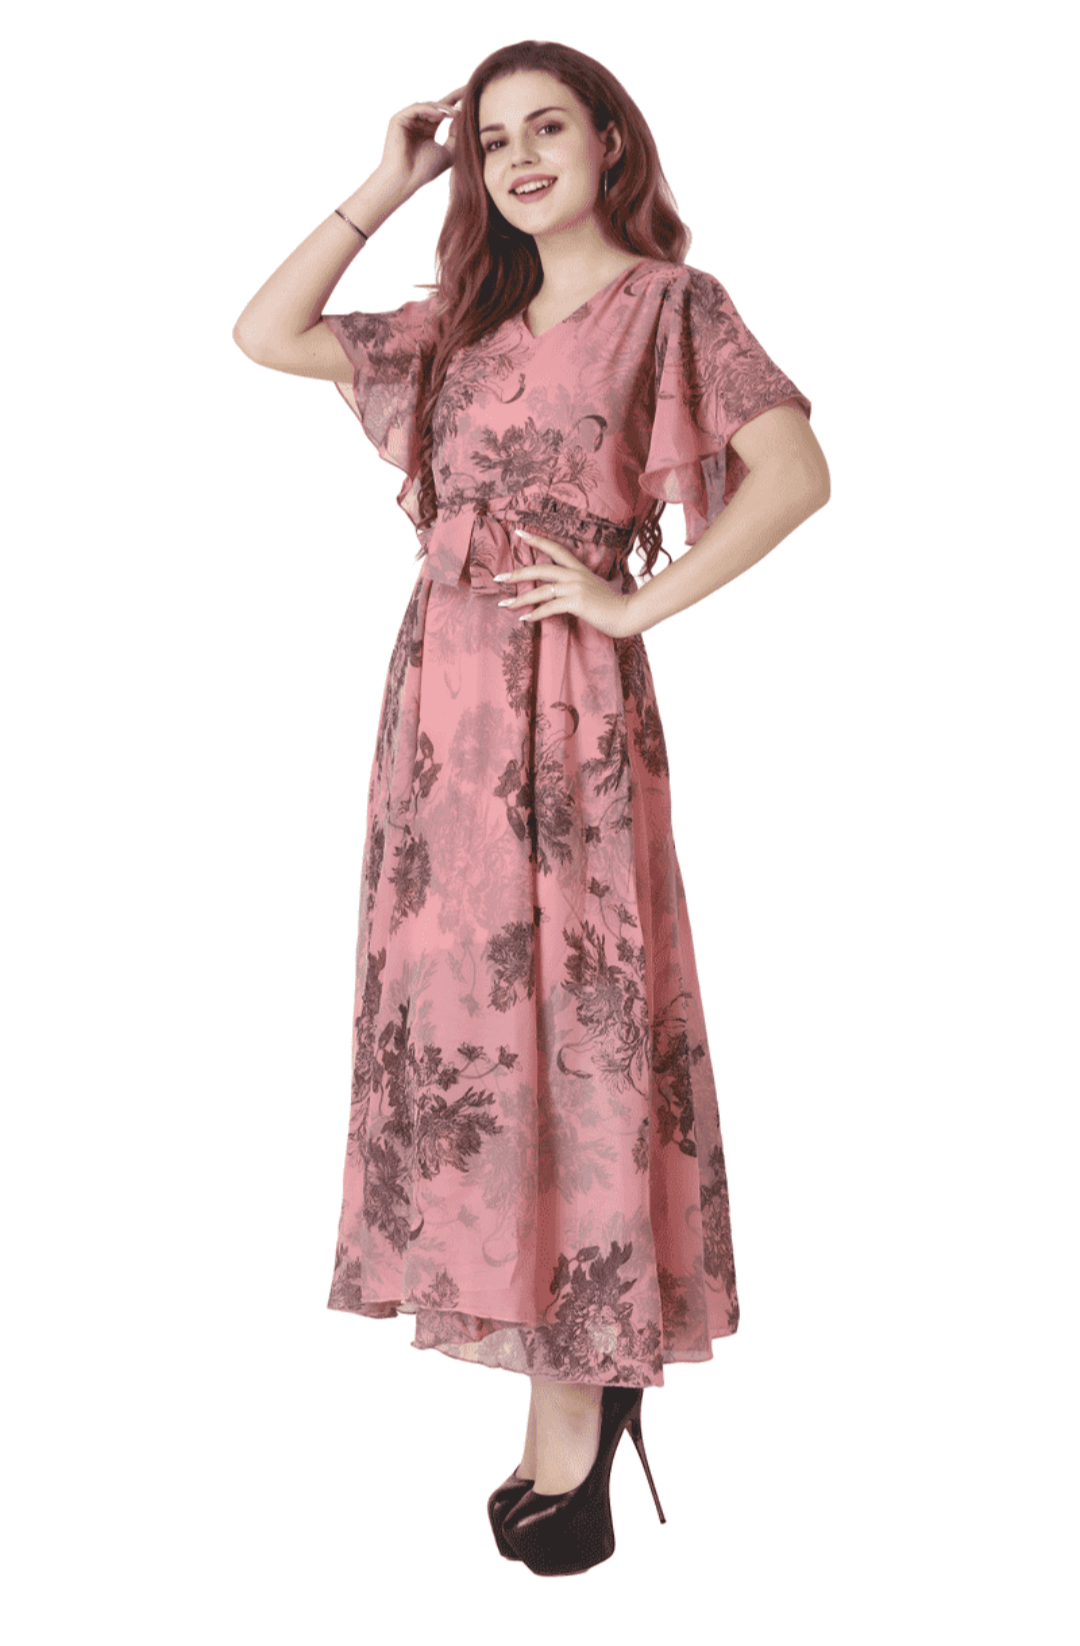 ATTIRIS Women's Georgette Floral Printed Fit and Flared Maxi Length Dress with Belt, V - Neck, Short Sleeve